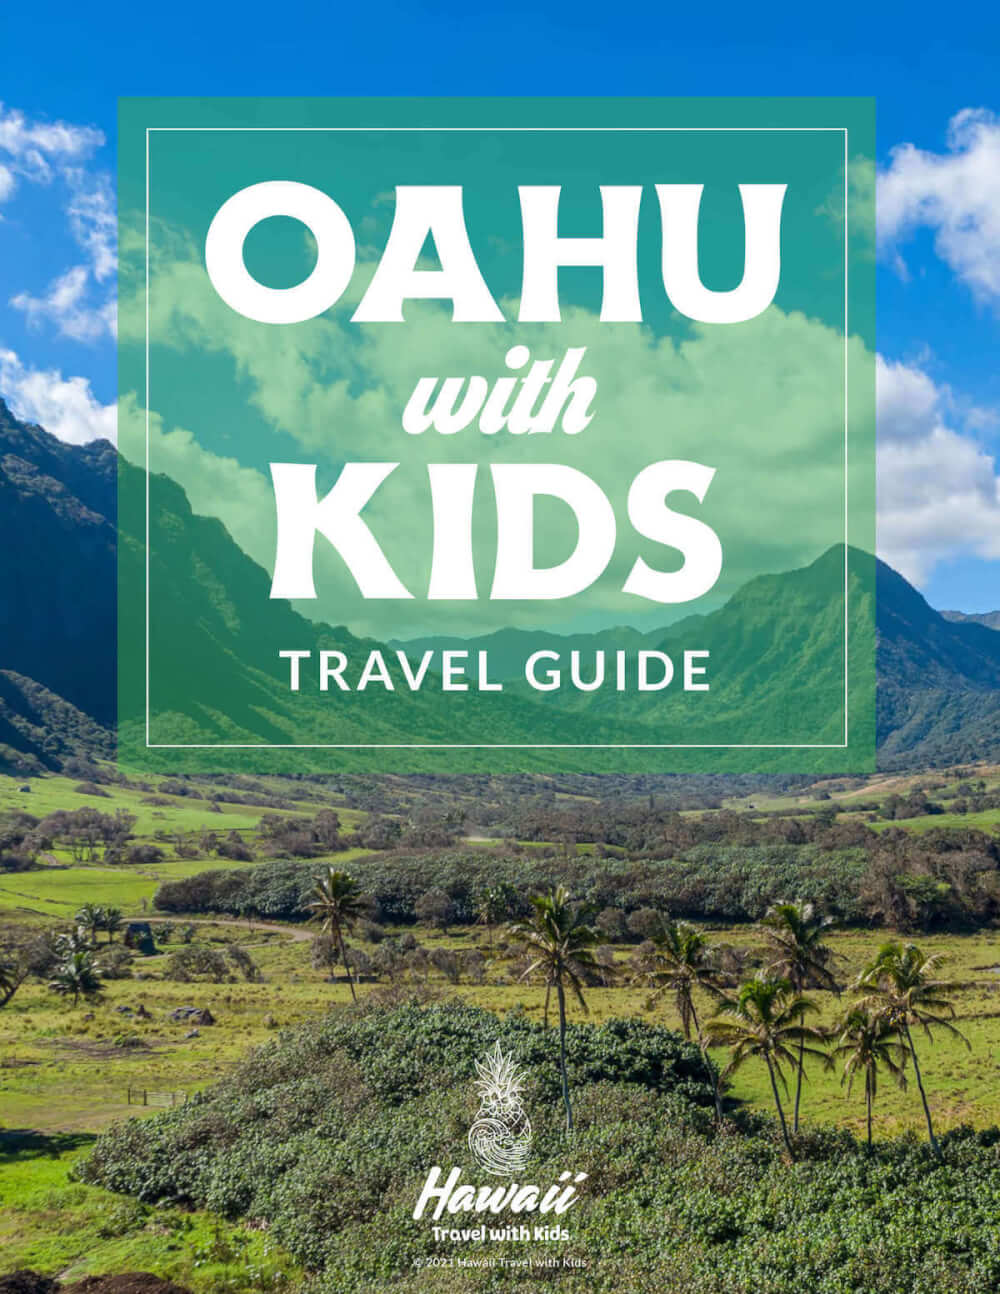 Plan the ultimate trip to Oahu with kids with this Oahu travel guide by top Hawaii blog Hawaii Travel with Kids. Image of the cover of the Oahu with Kids Travel Guide.